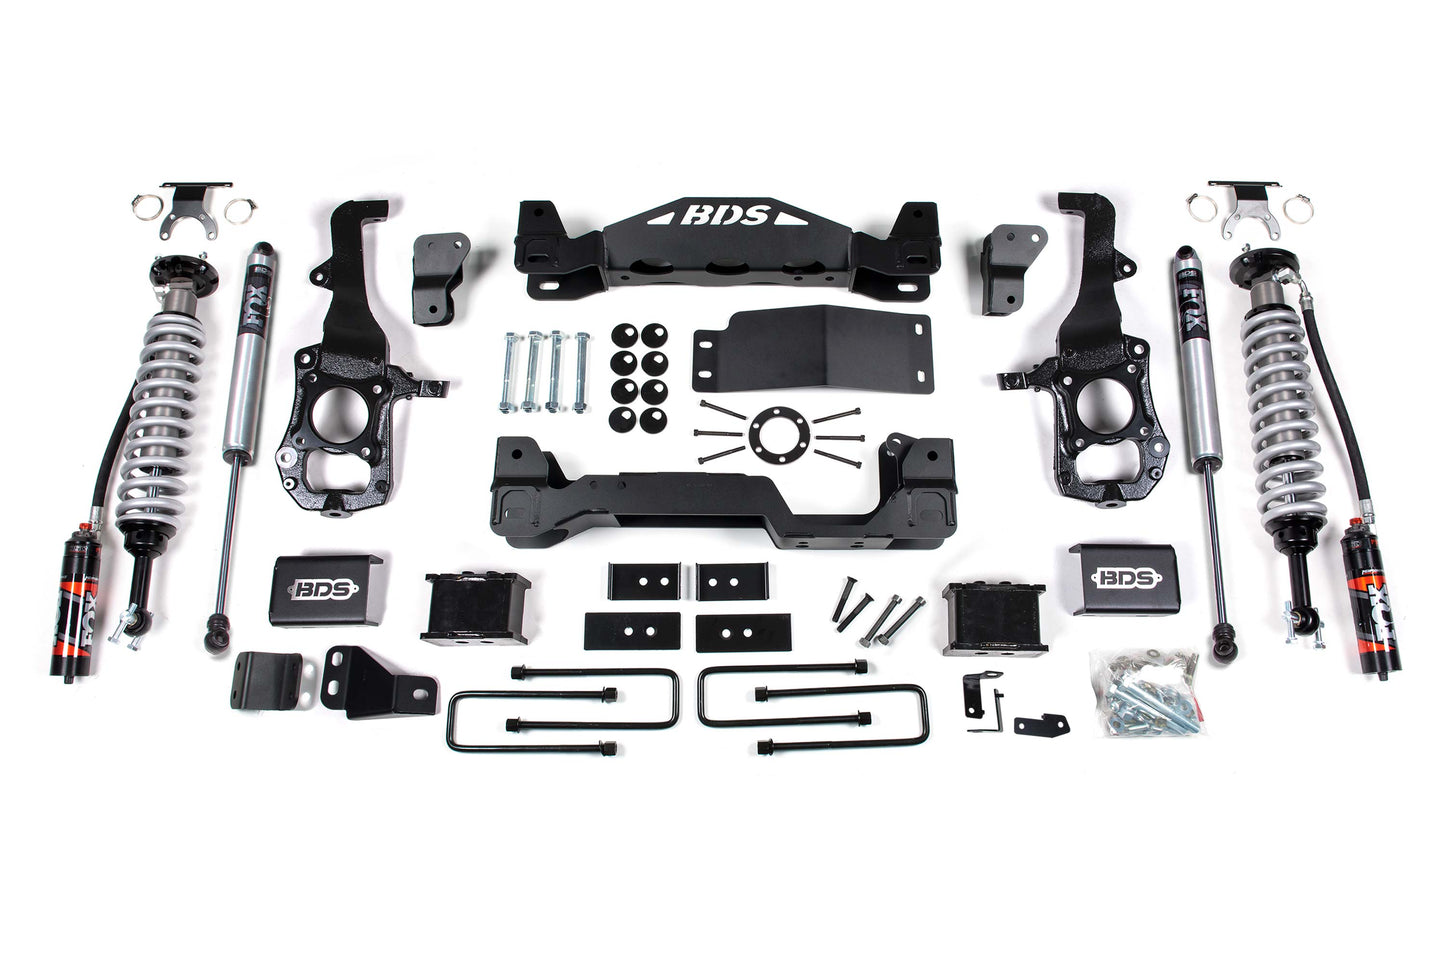 BDS 6" Lift Kit for 2015-2020 Ford F150 with Fox 2.5 Performance Elite Shocks